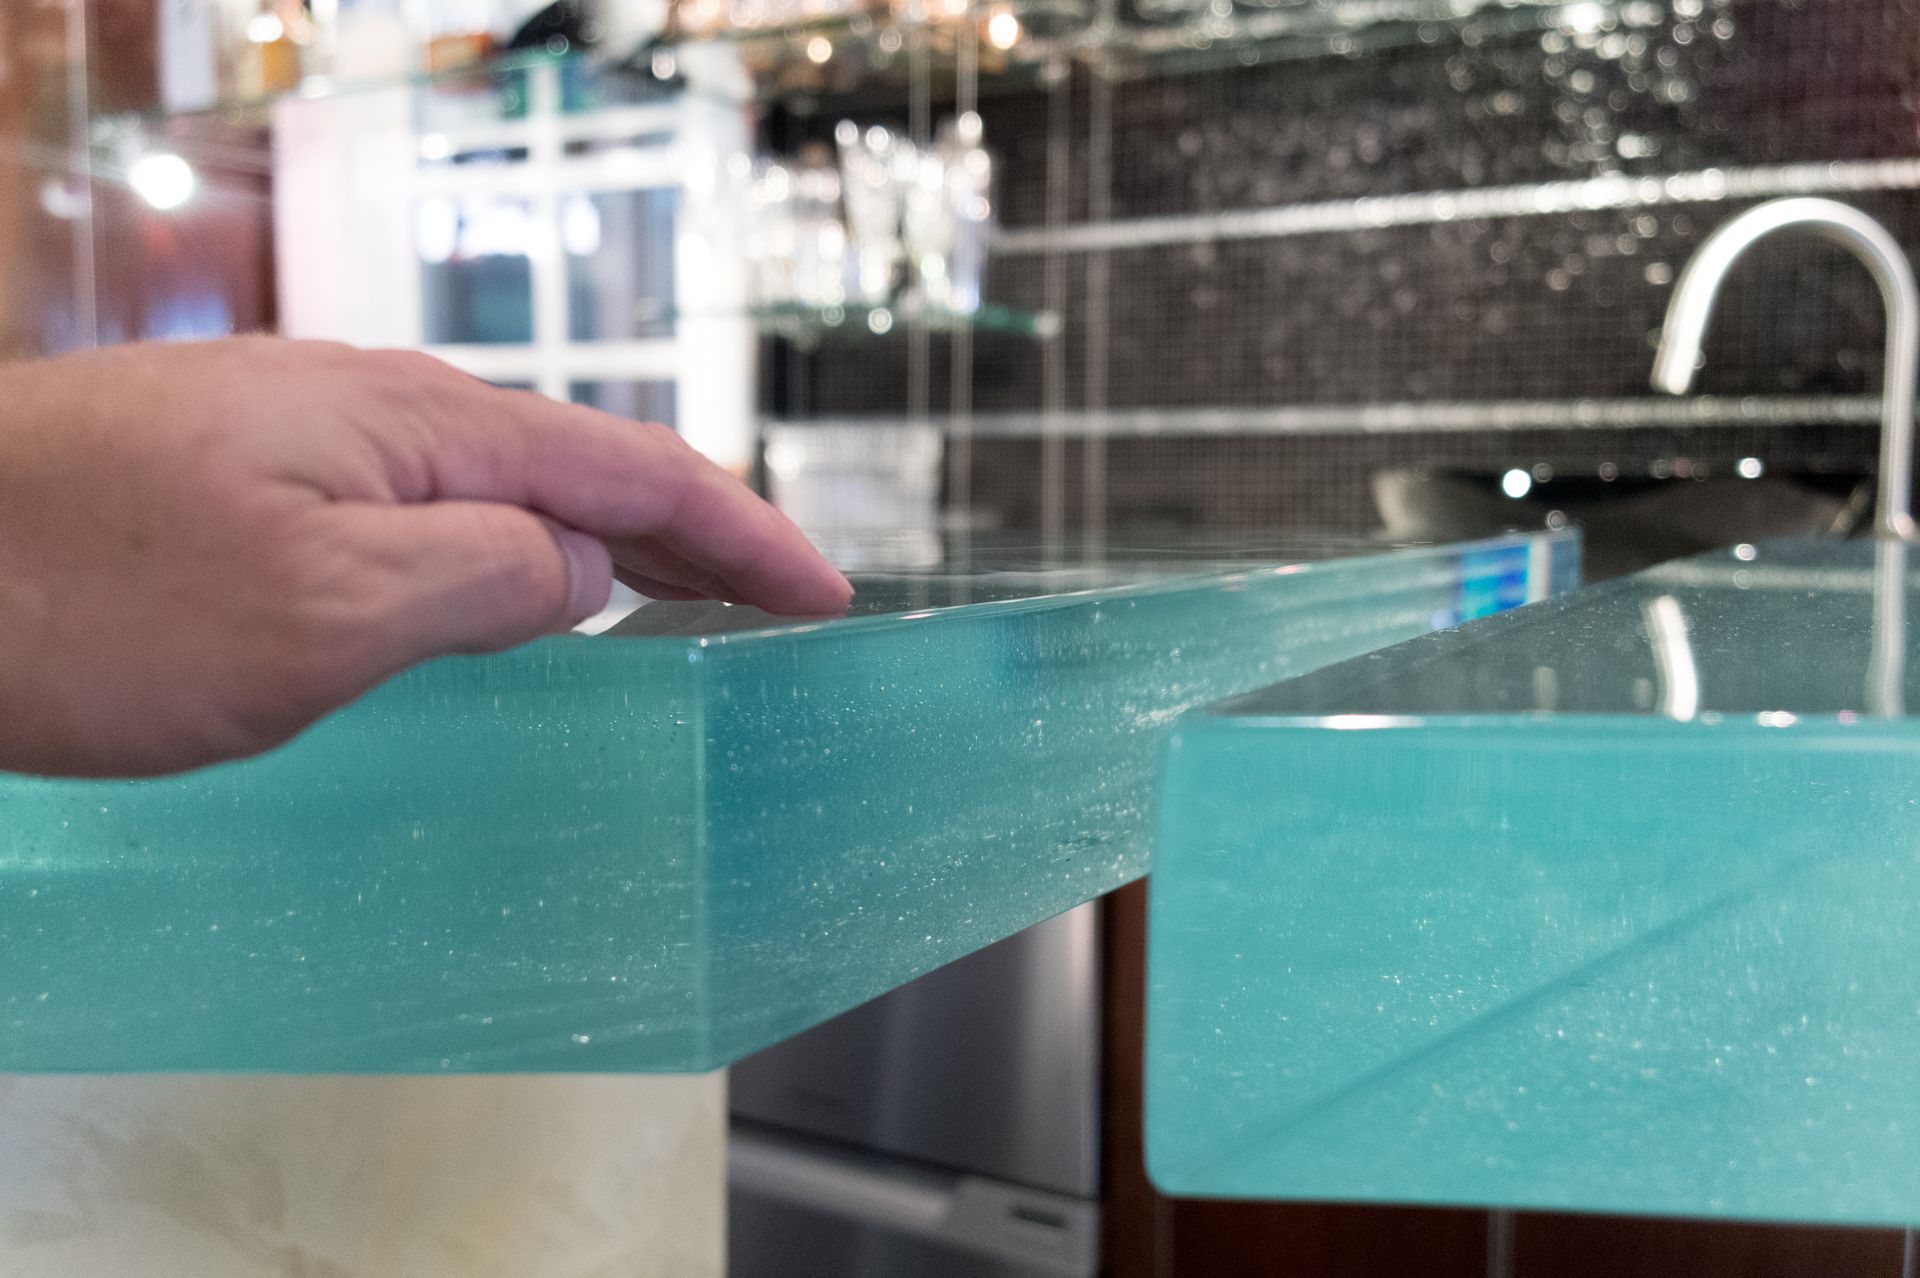 A hand resting on a thick glass countertop